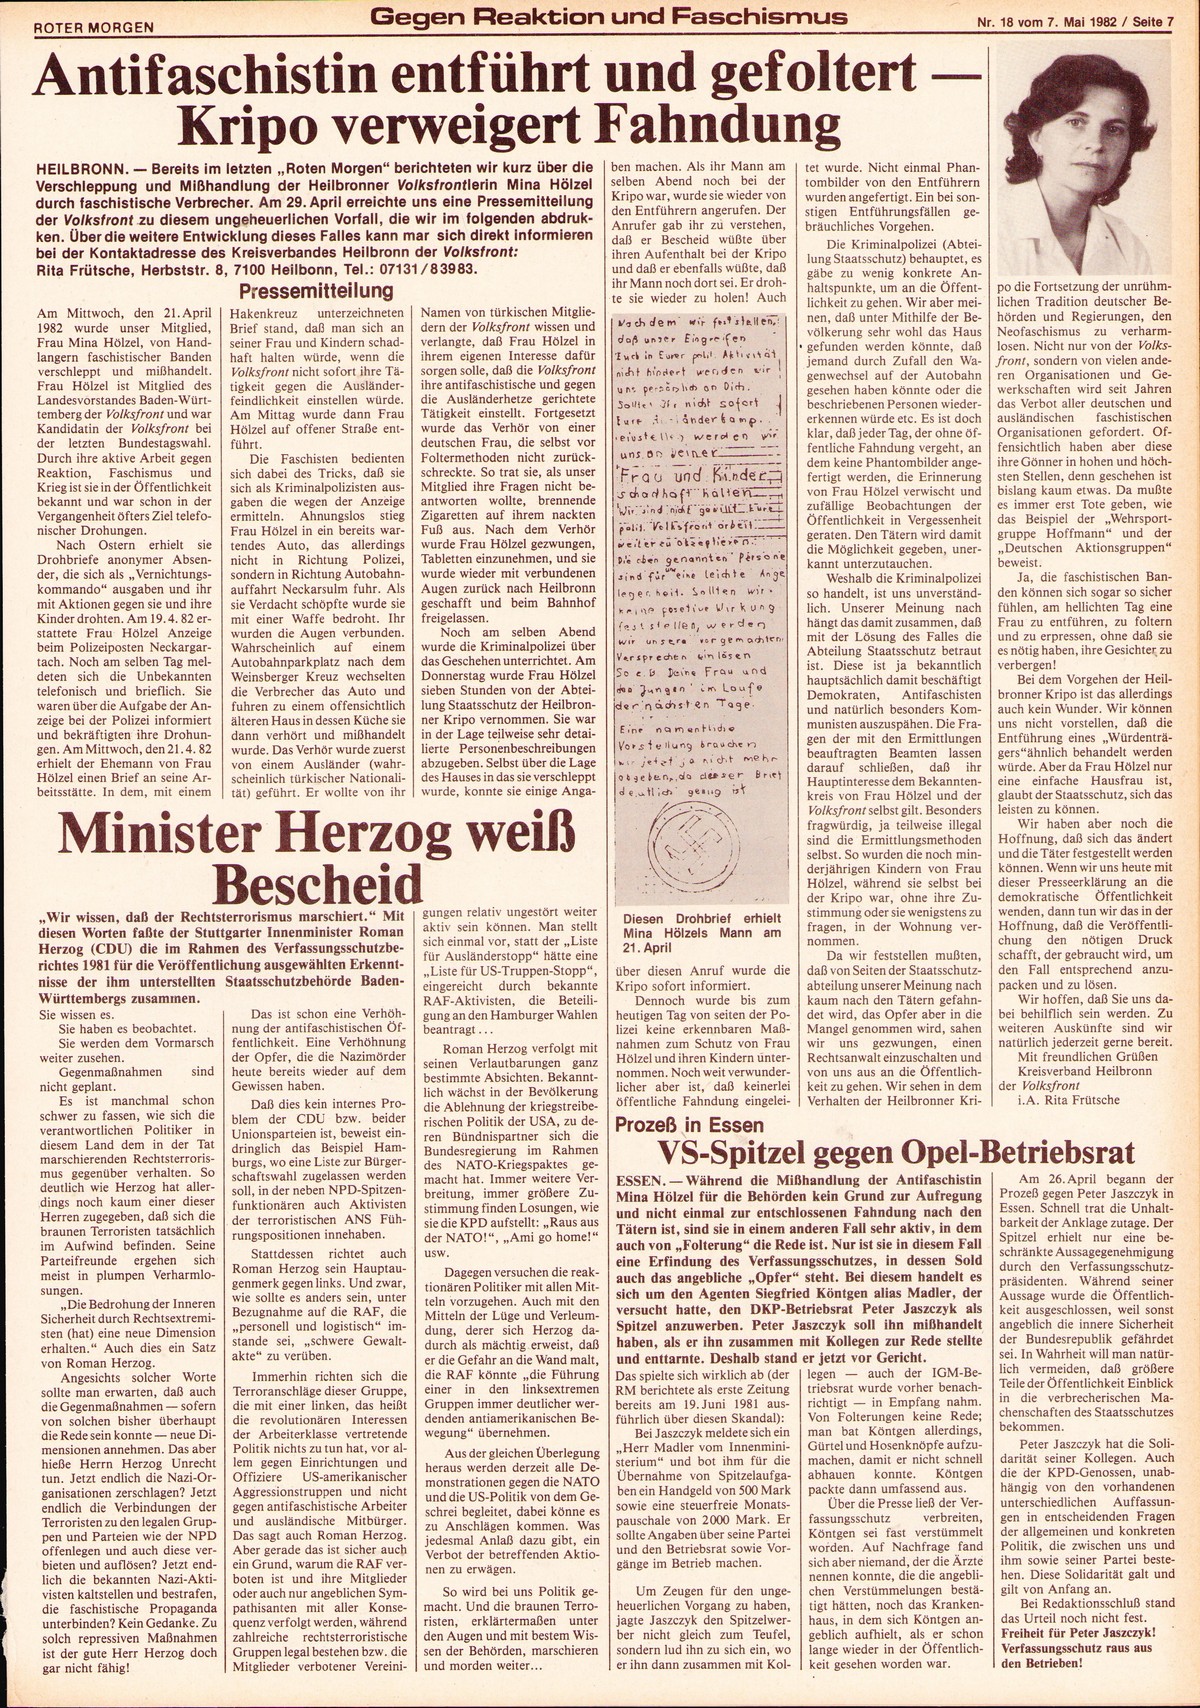 Roter Morgen, 16. Jg., 7. Mail 1982, Nr. 18, Seite 7